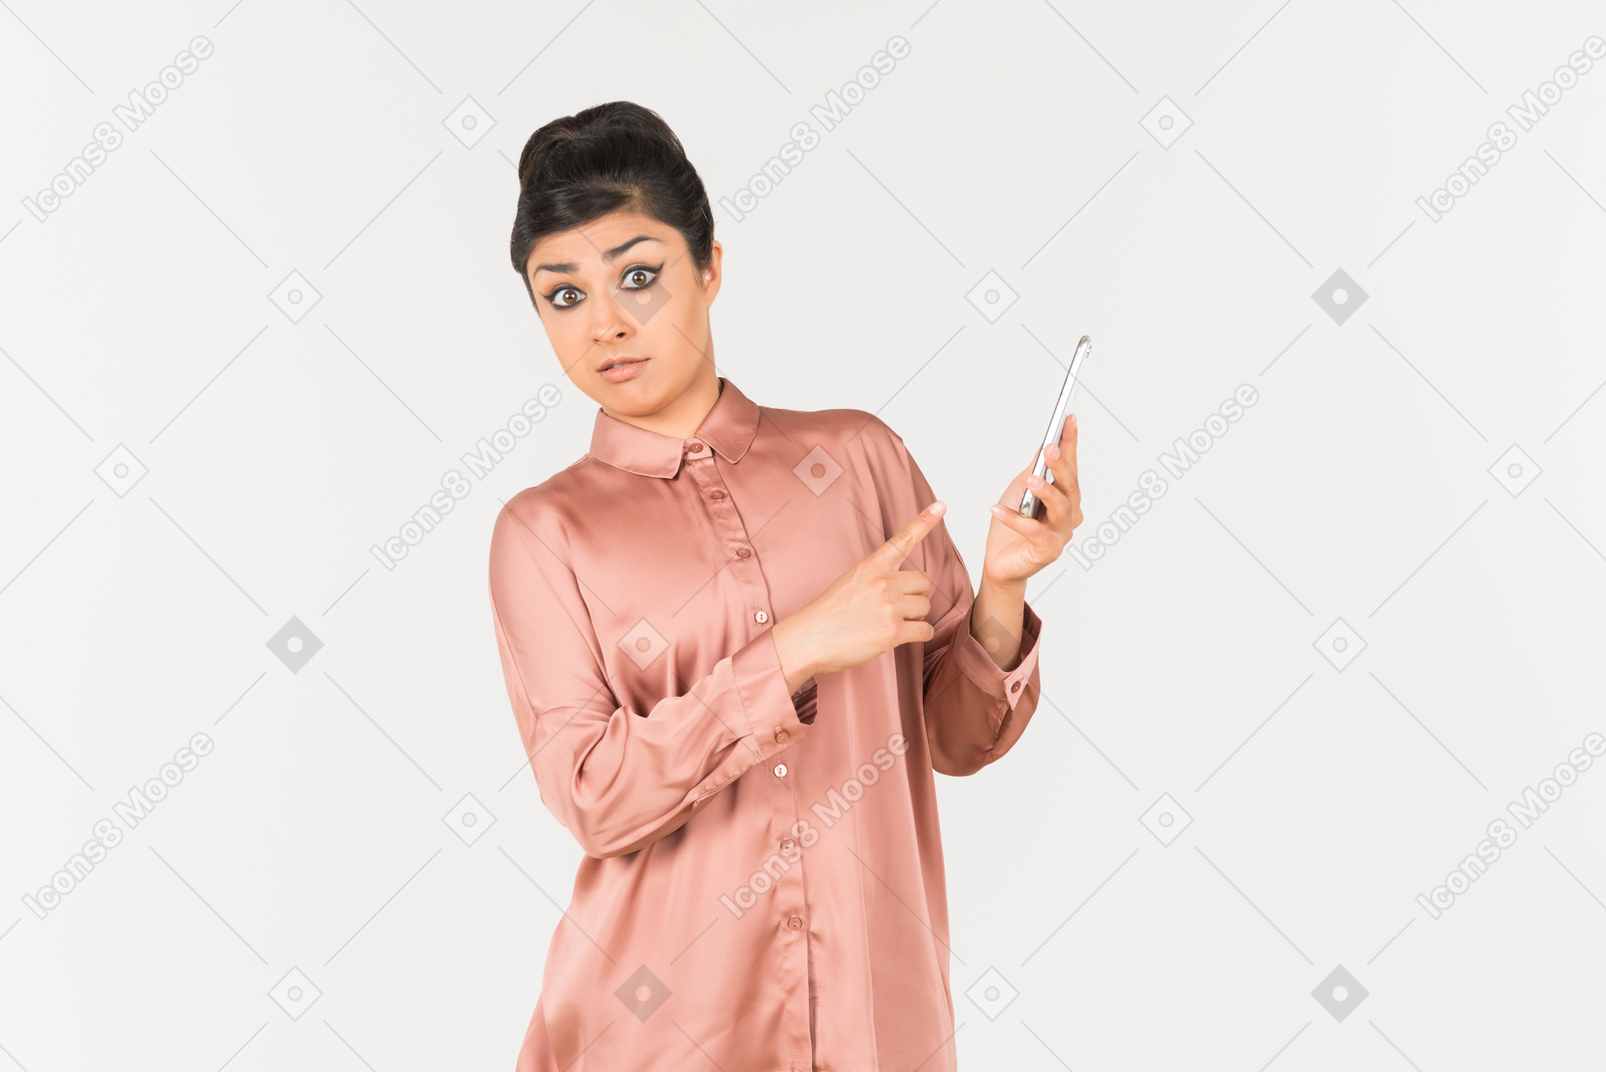 Surprised indian office worker holding phone